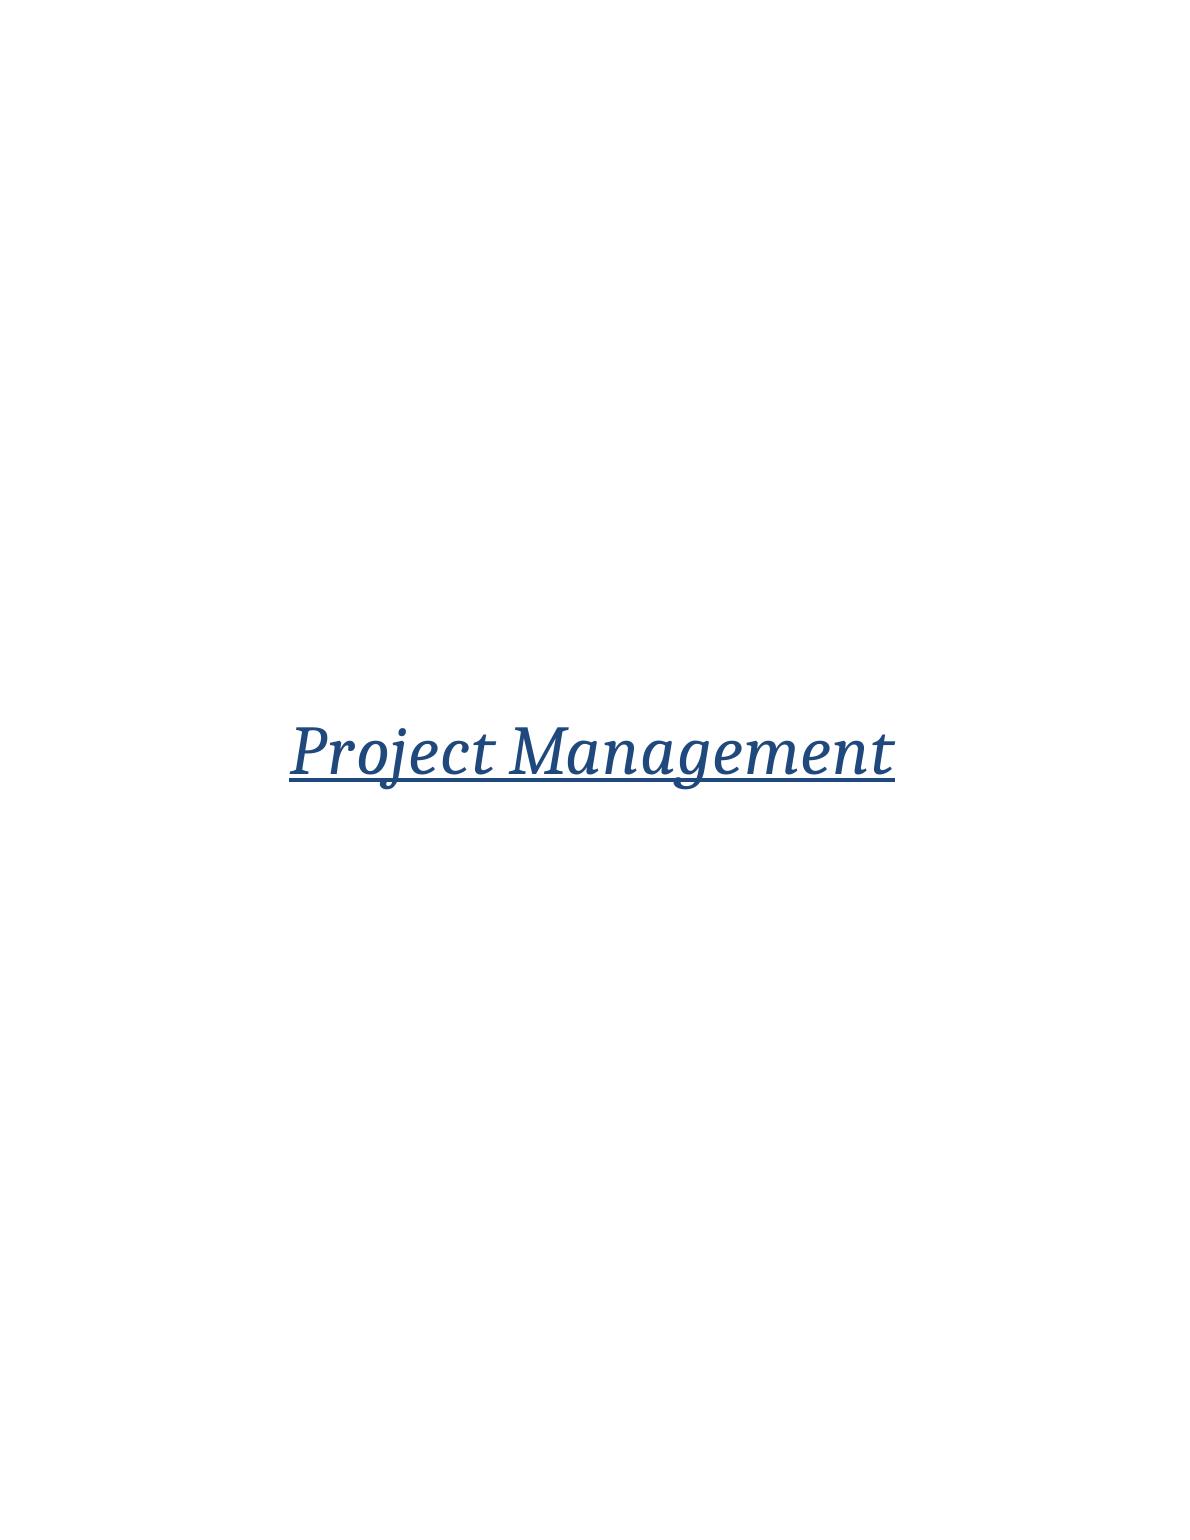 Project Management  - Sample Assignment_1